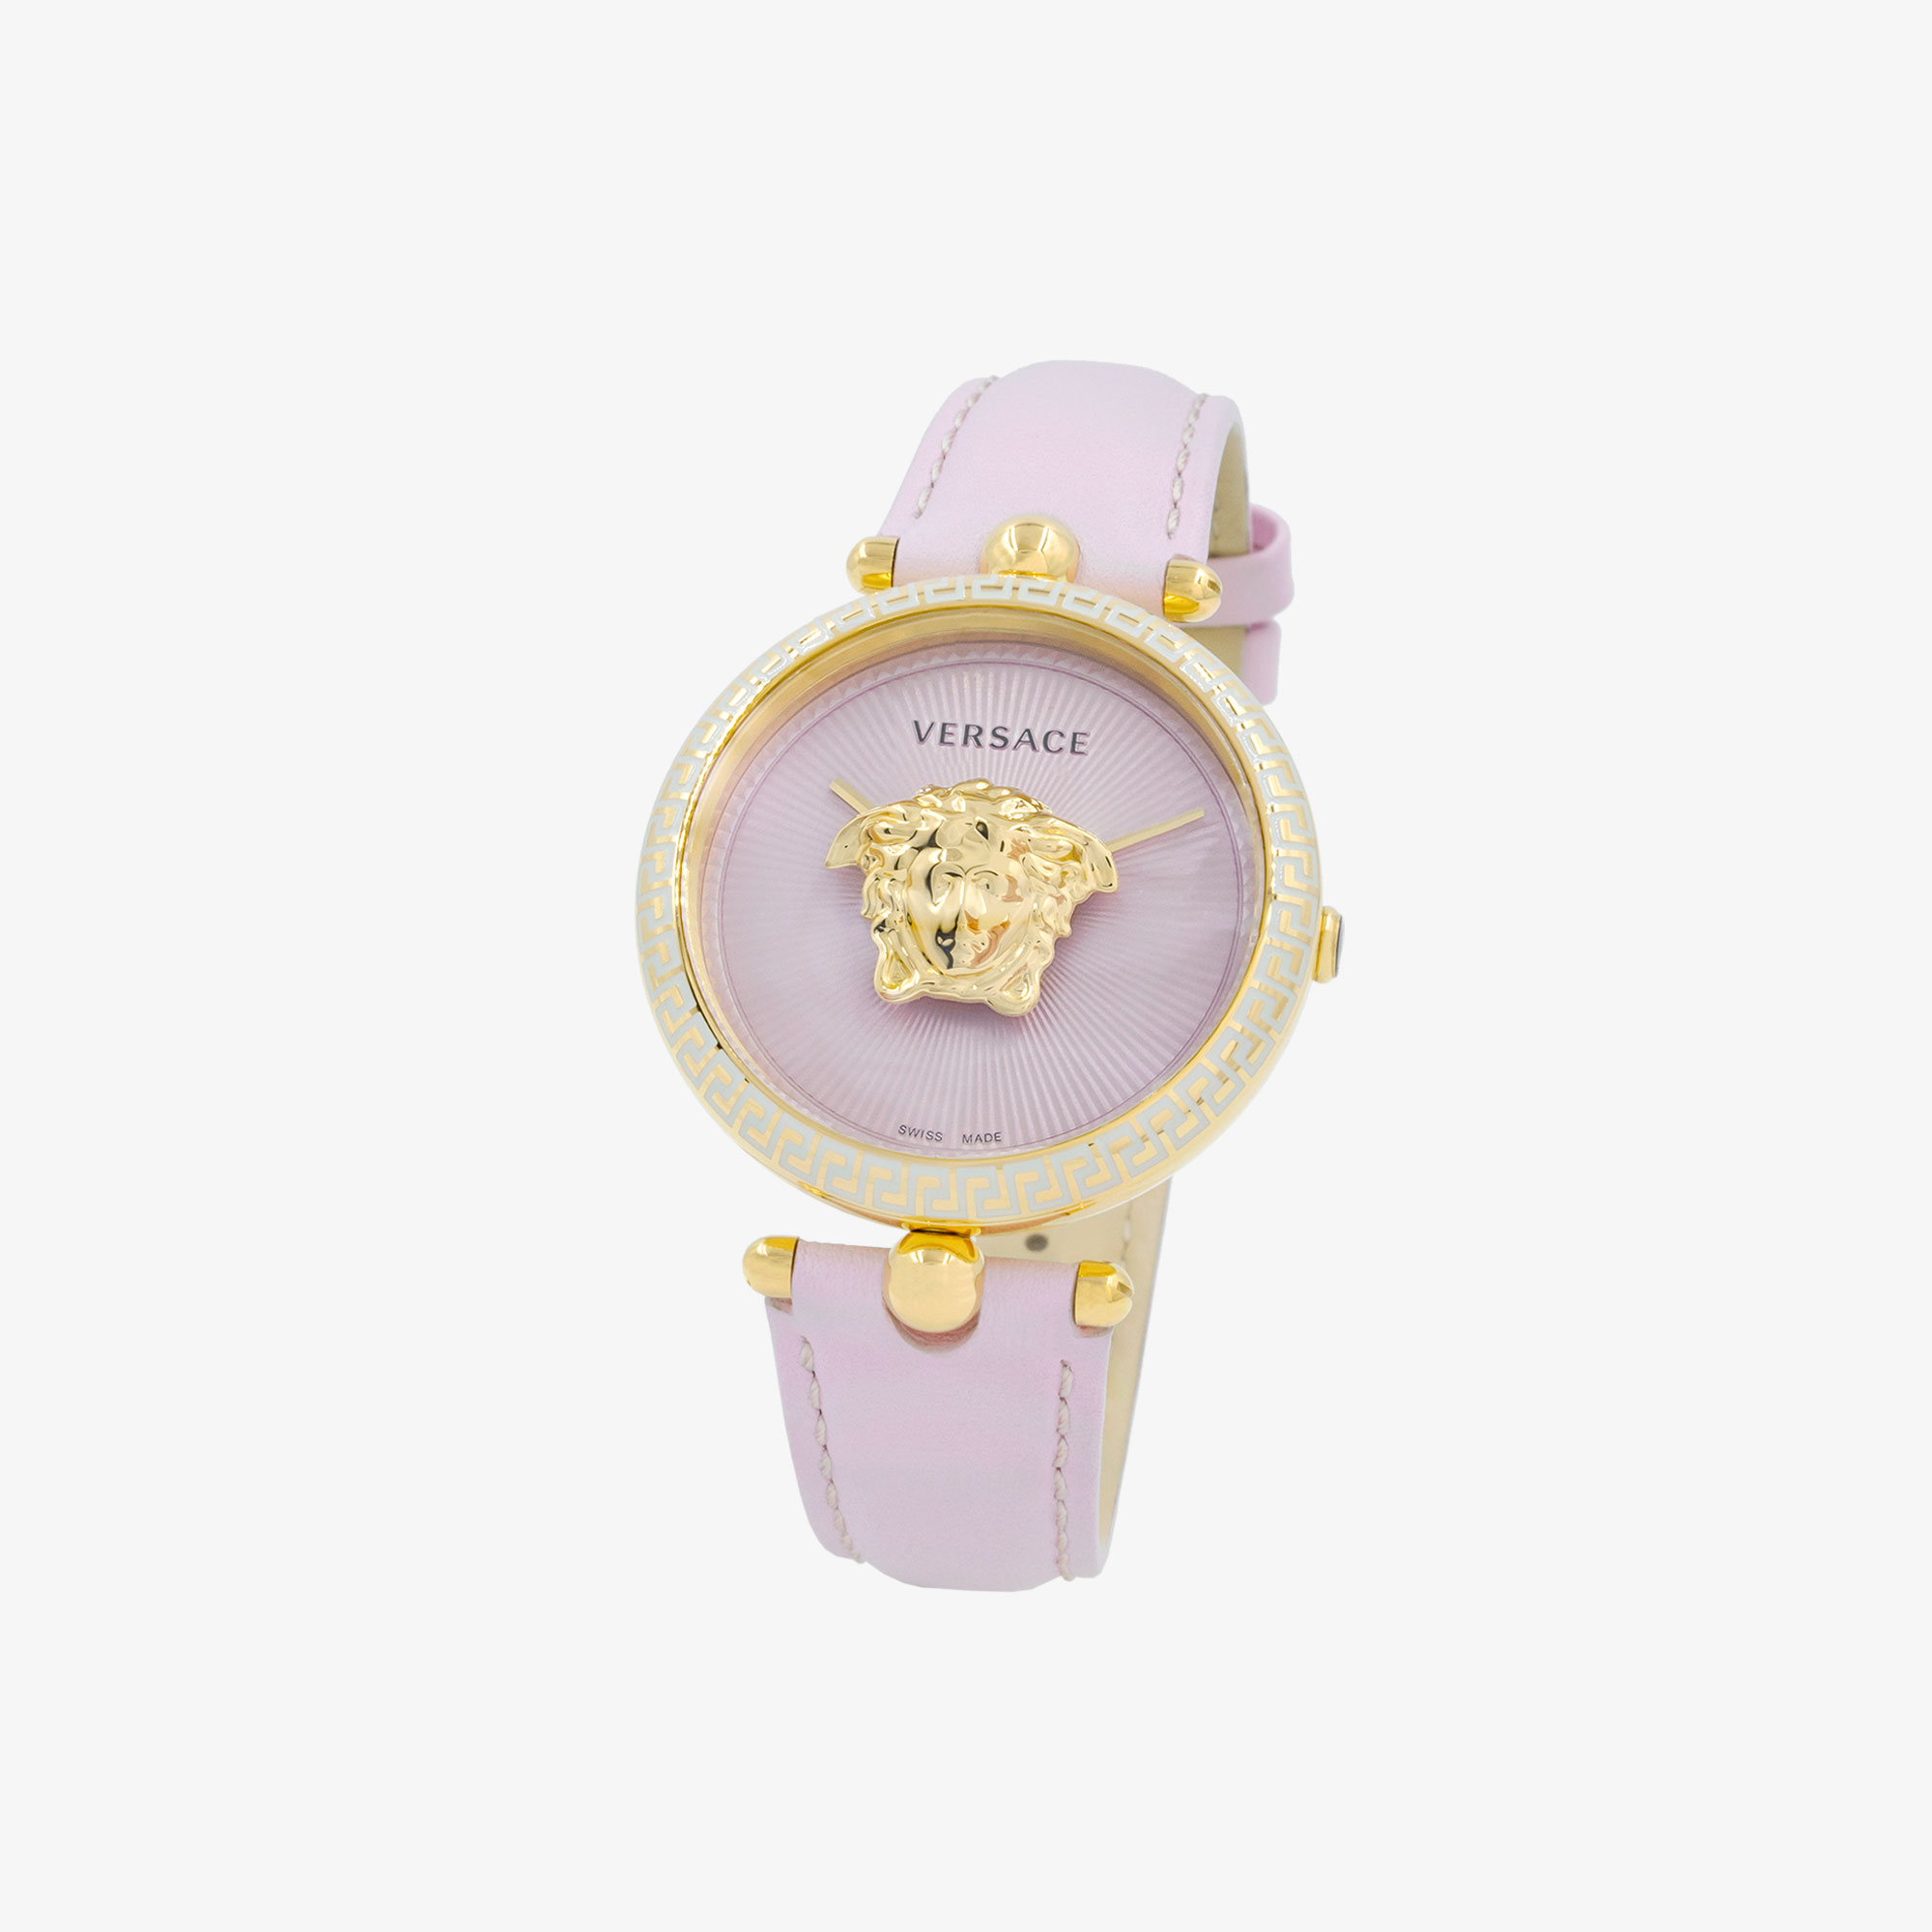 VERSACE PALAZZIO EMPIRE WATCH WITH PINK LEATHER STRAP